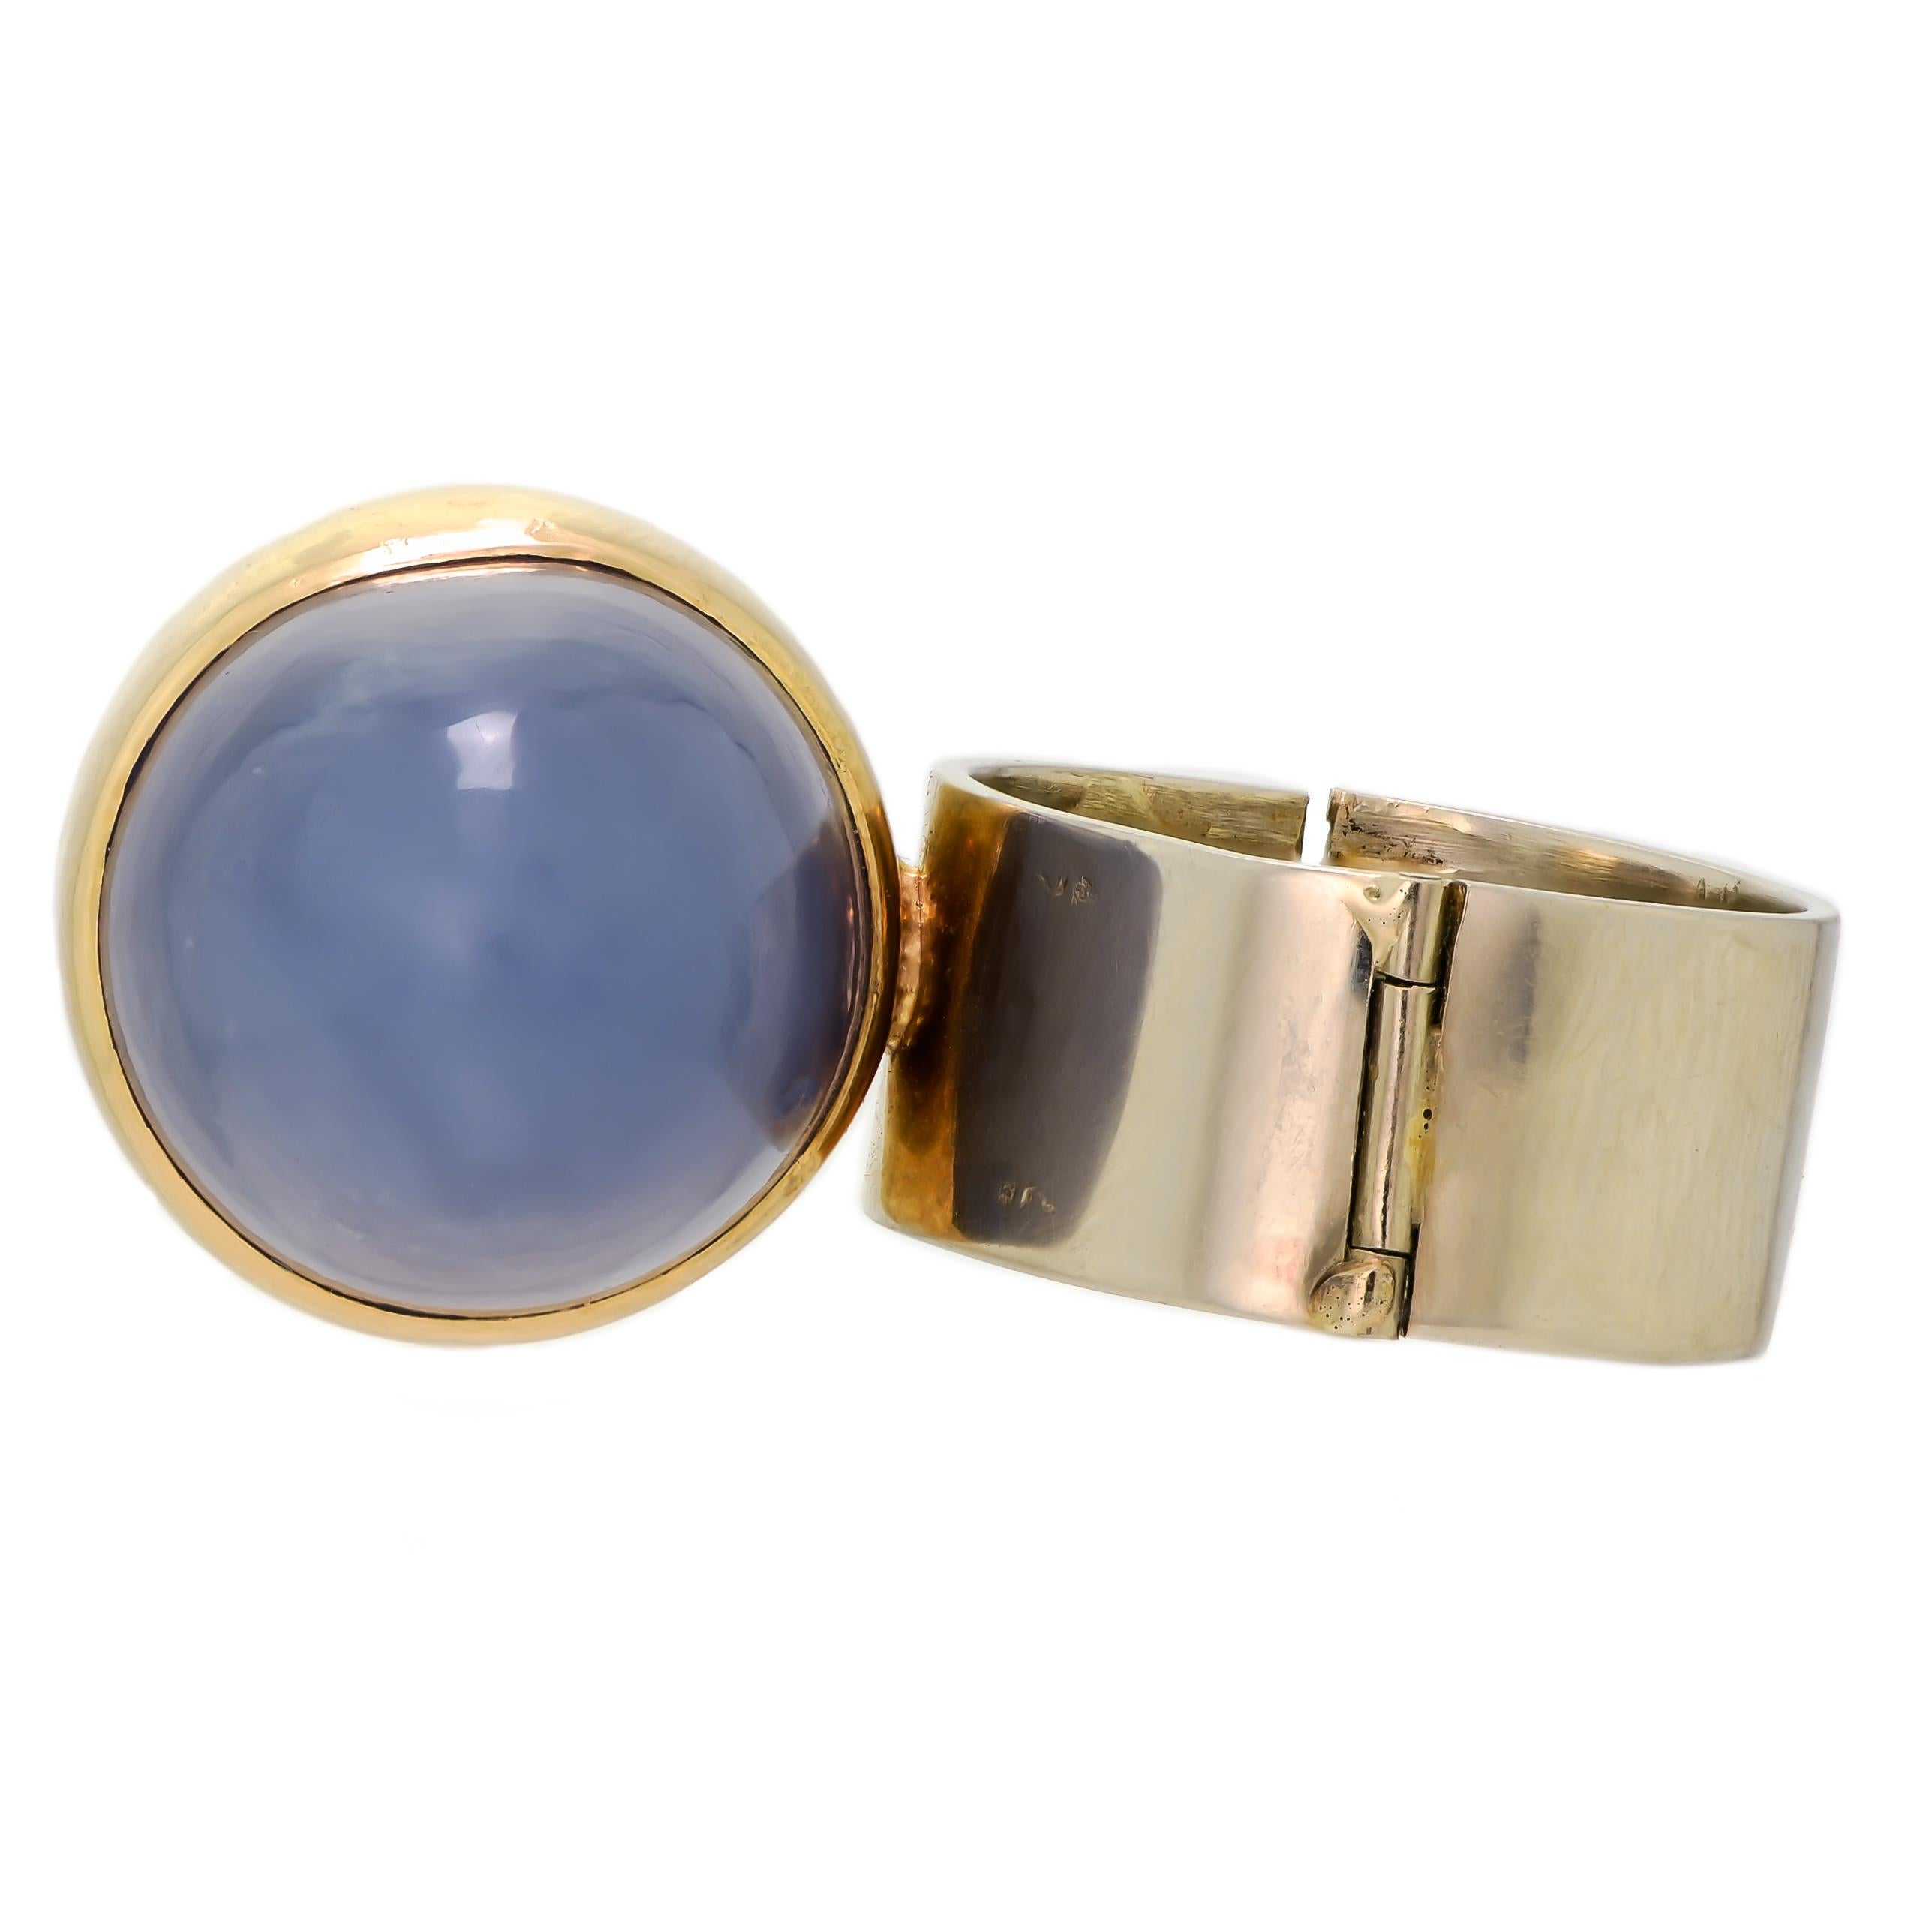 This stunning ring is a work of art that combines the natural beauty of rhodonite and blue chalcedony with the elegance of 14-karat bicolor gold. The design is modernist, with a wideband hinged structure that makes it easy to wear and remove. The